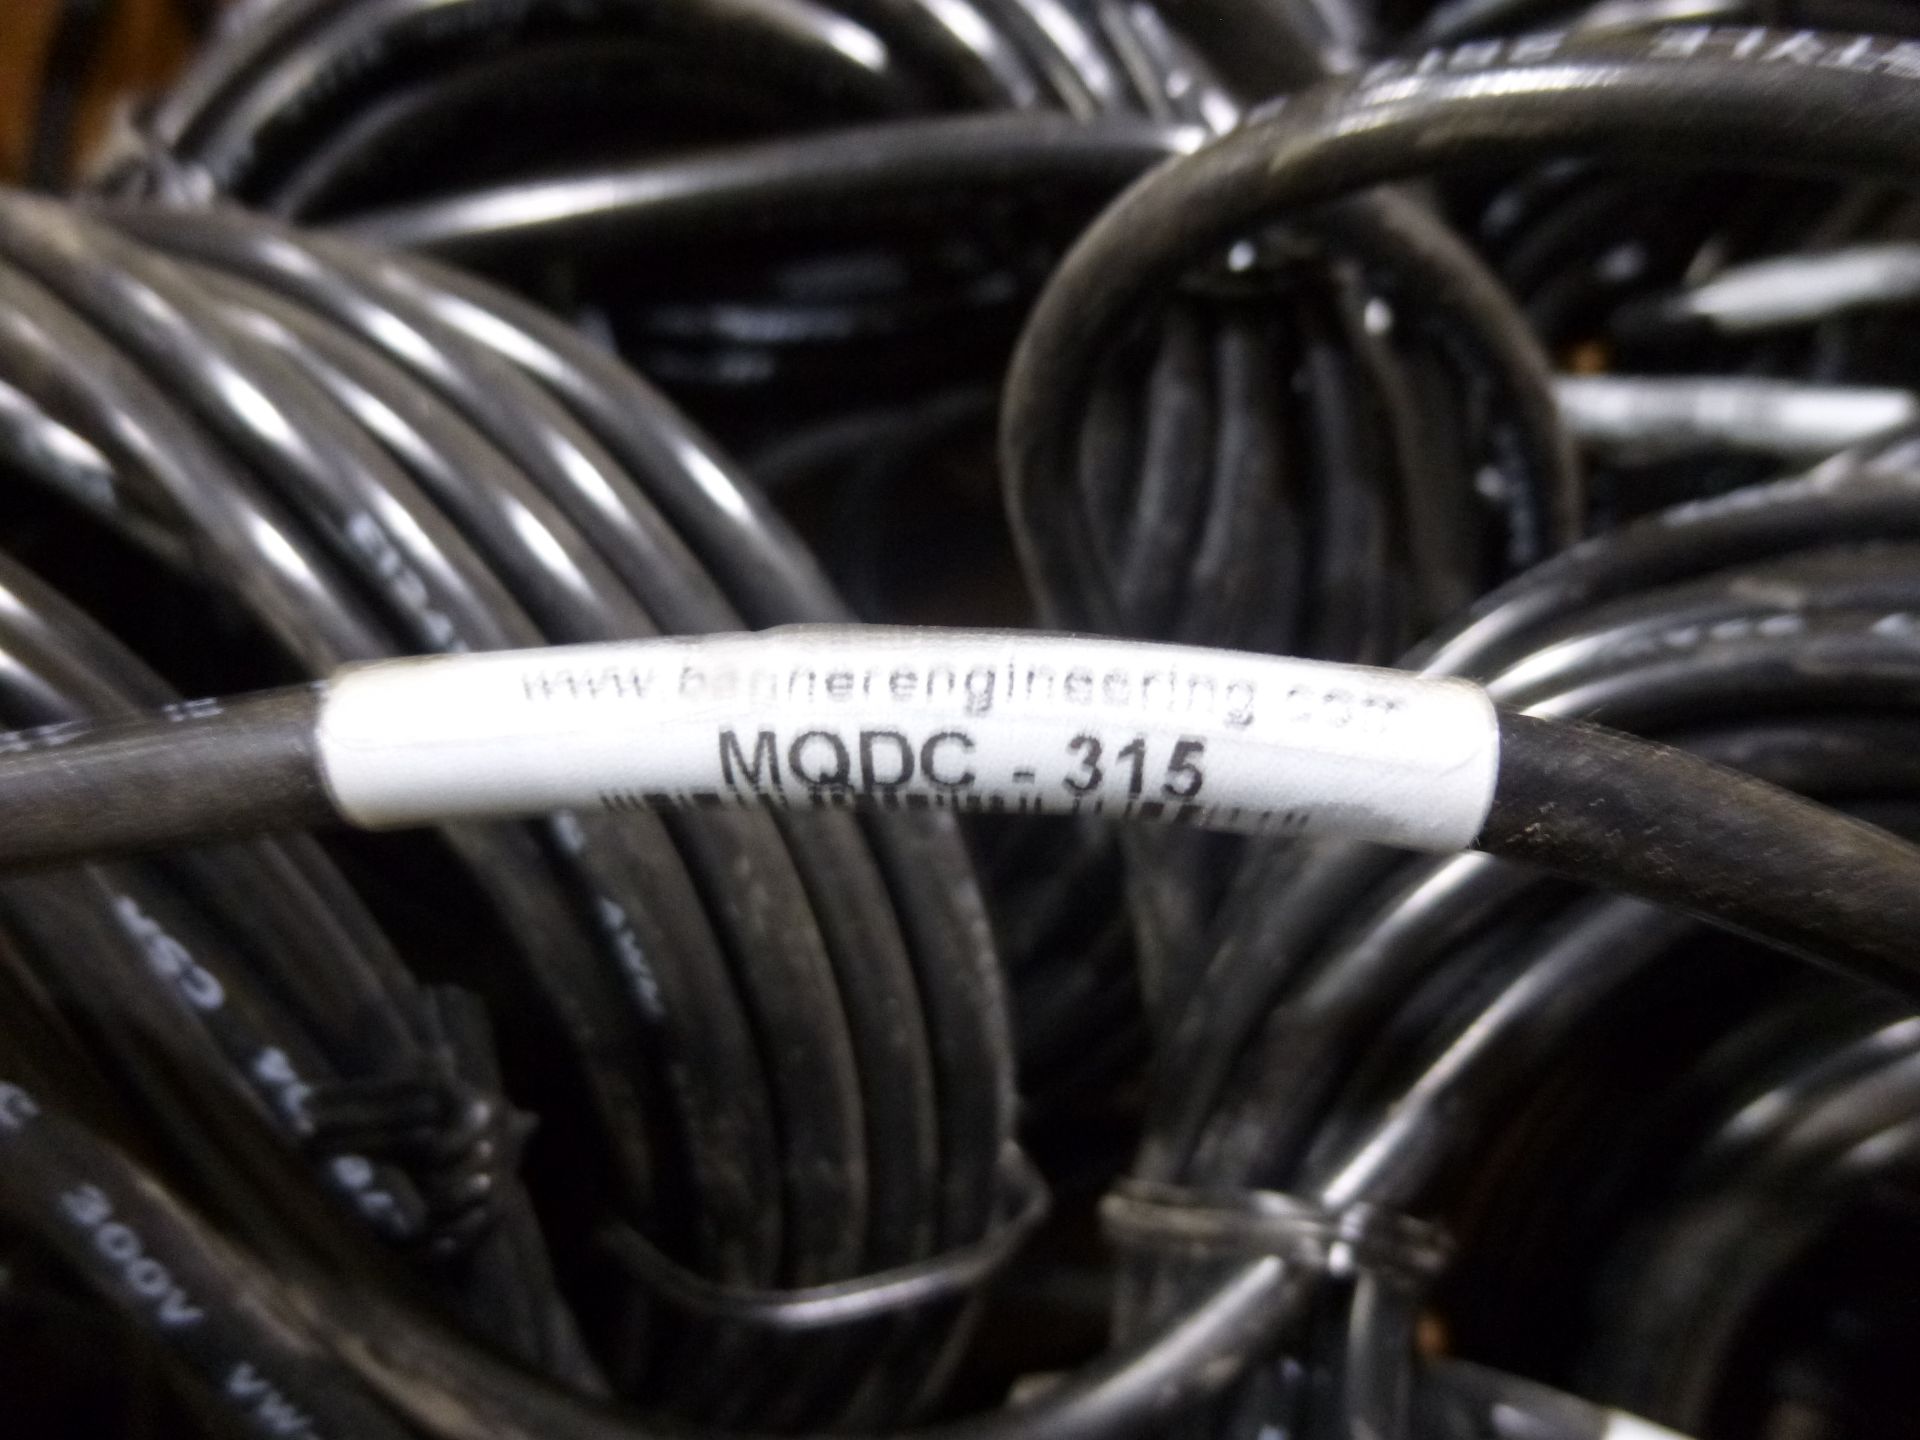 Qty 15 Banner cordset part number MQDC-315, new without packages, as always with Brolyn LLC - Image 2 of 2